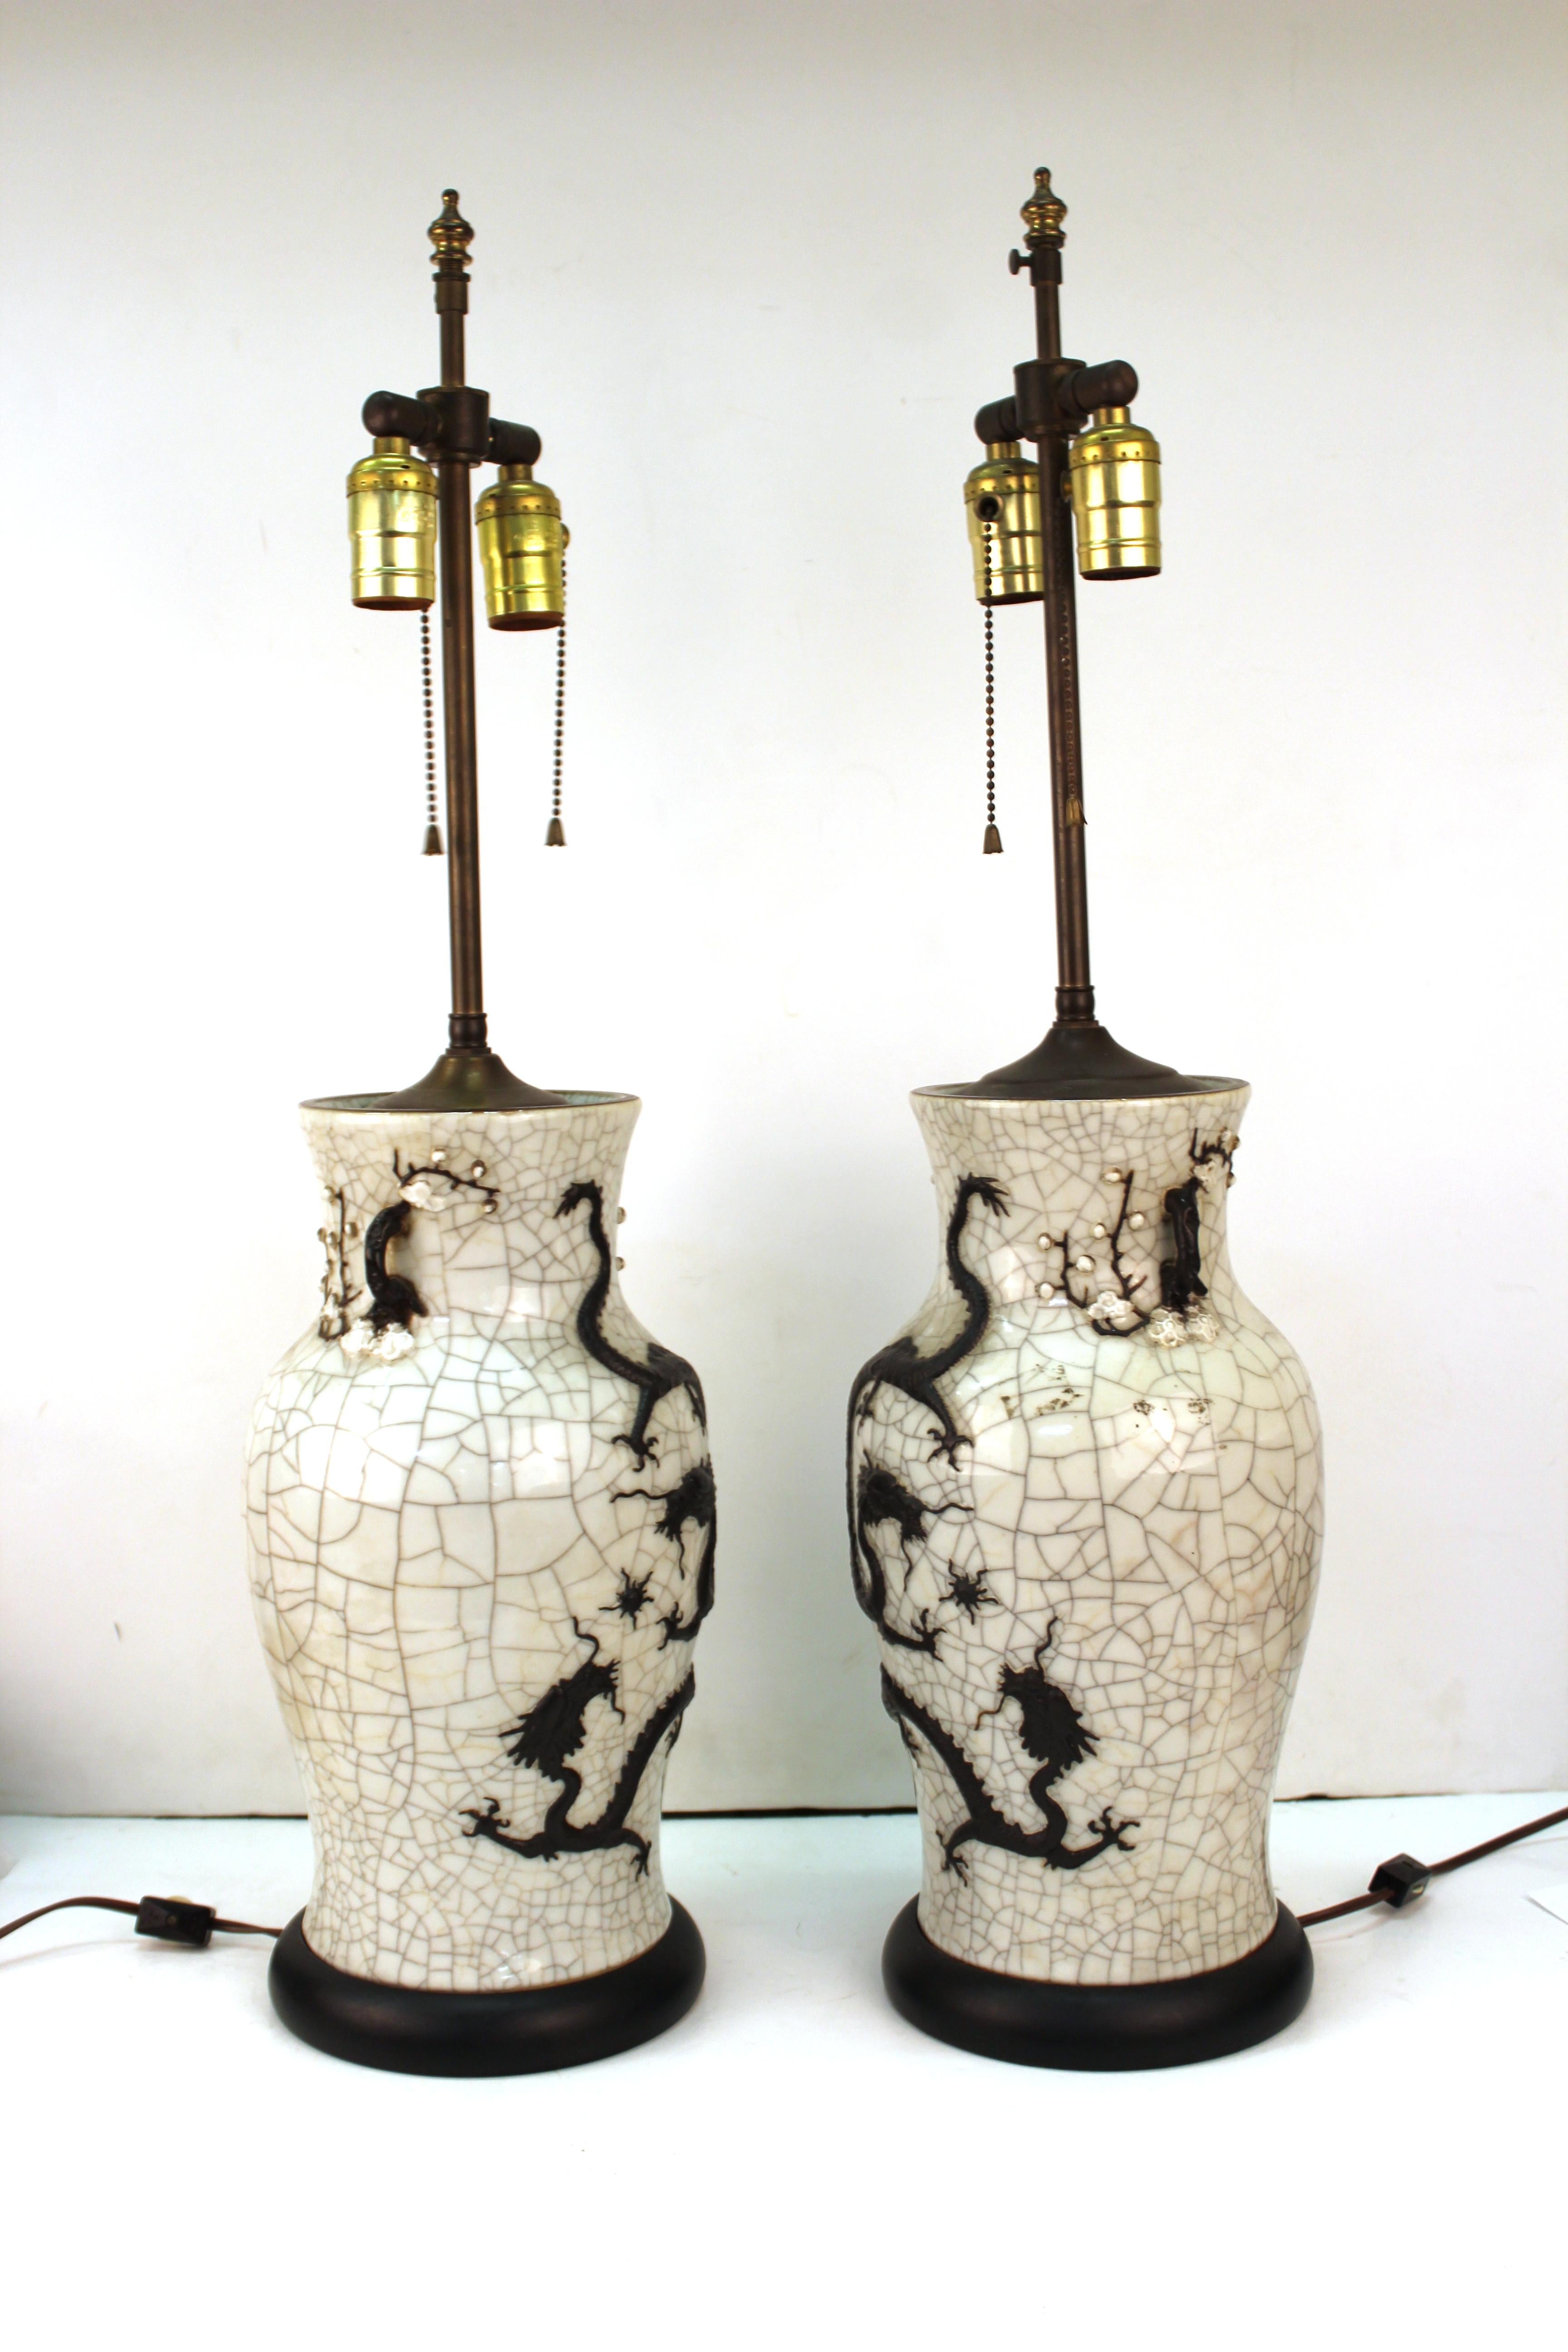 Chinese Qing dynasty pair of vases with crackle glaze and molded dragons. The pair is mounted on circular bases and transformed into table lamps. Made in the circa 1870s, the vases are in great antique condition with age-appropriate wear and use.